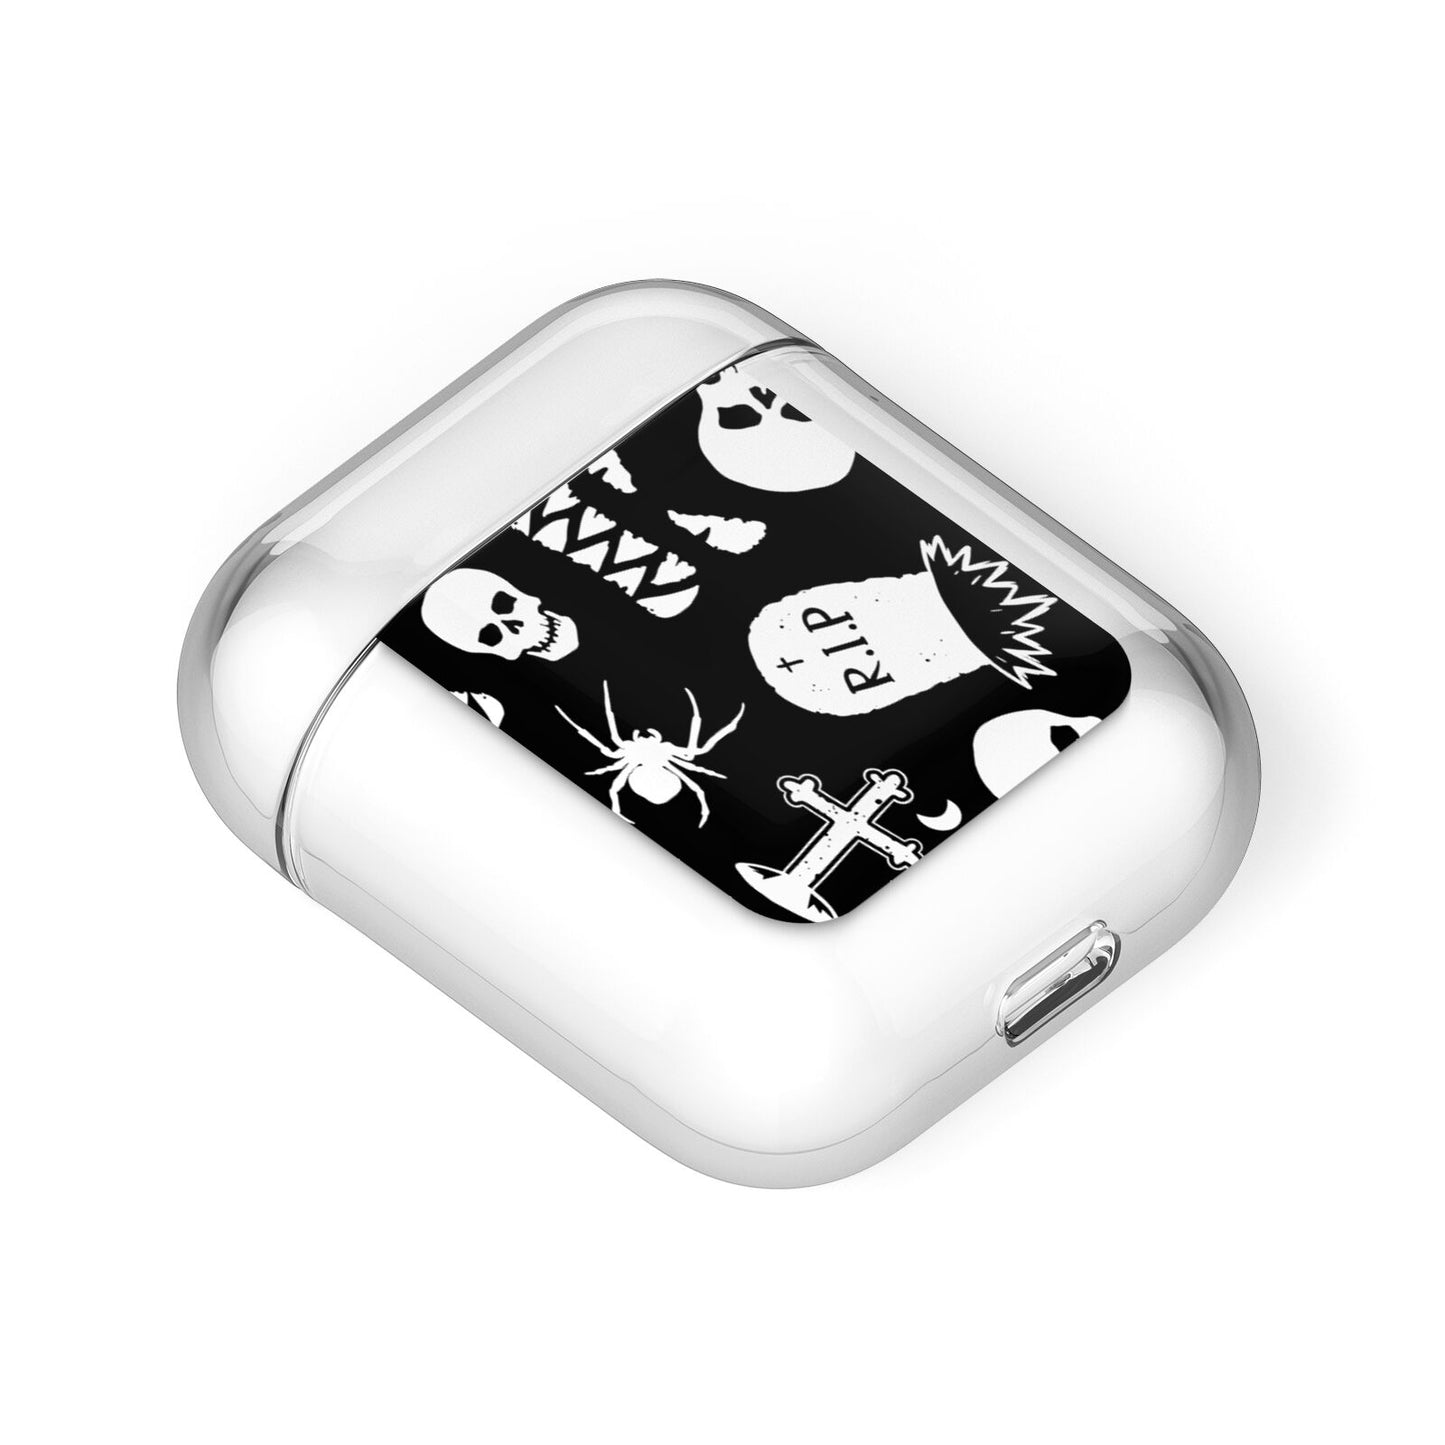 Spooky Illustrations AirPods Case Laid Flat